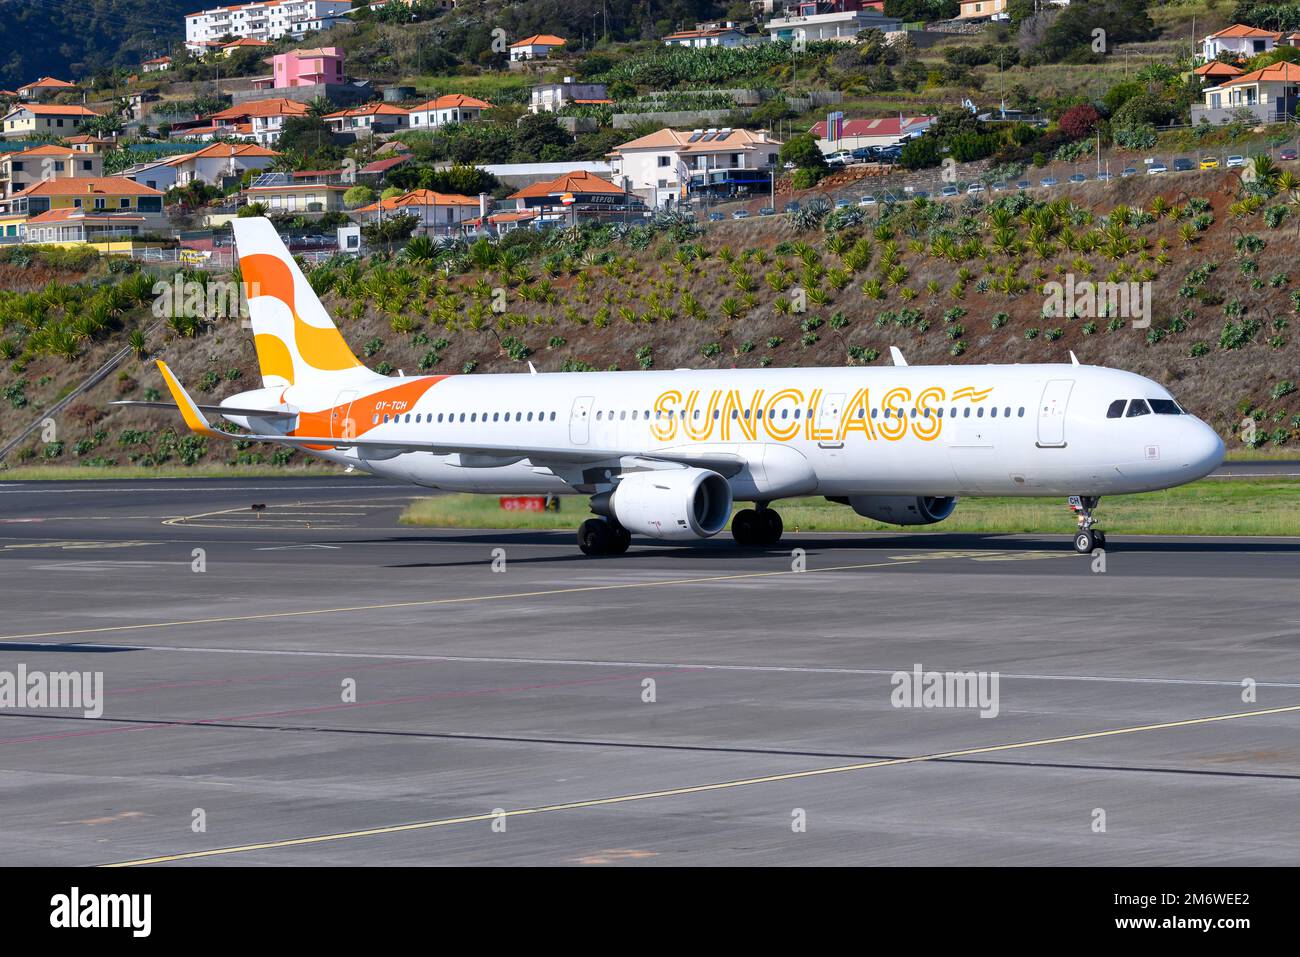 Sunclass Airlines Airbus A321 aircraft taxiing. Charter airline SunClass Airline with A321 airplane. Stock Photo